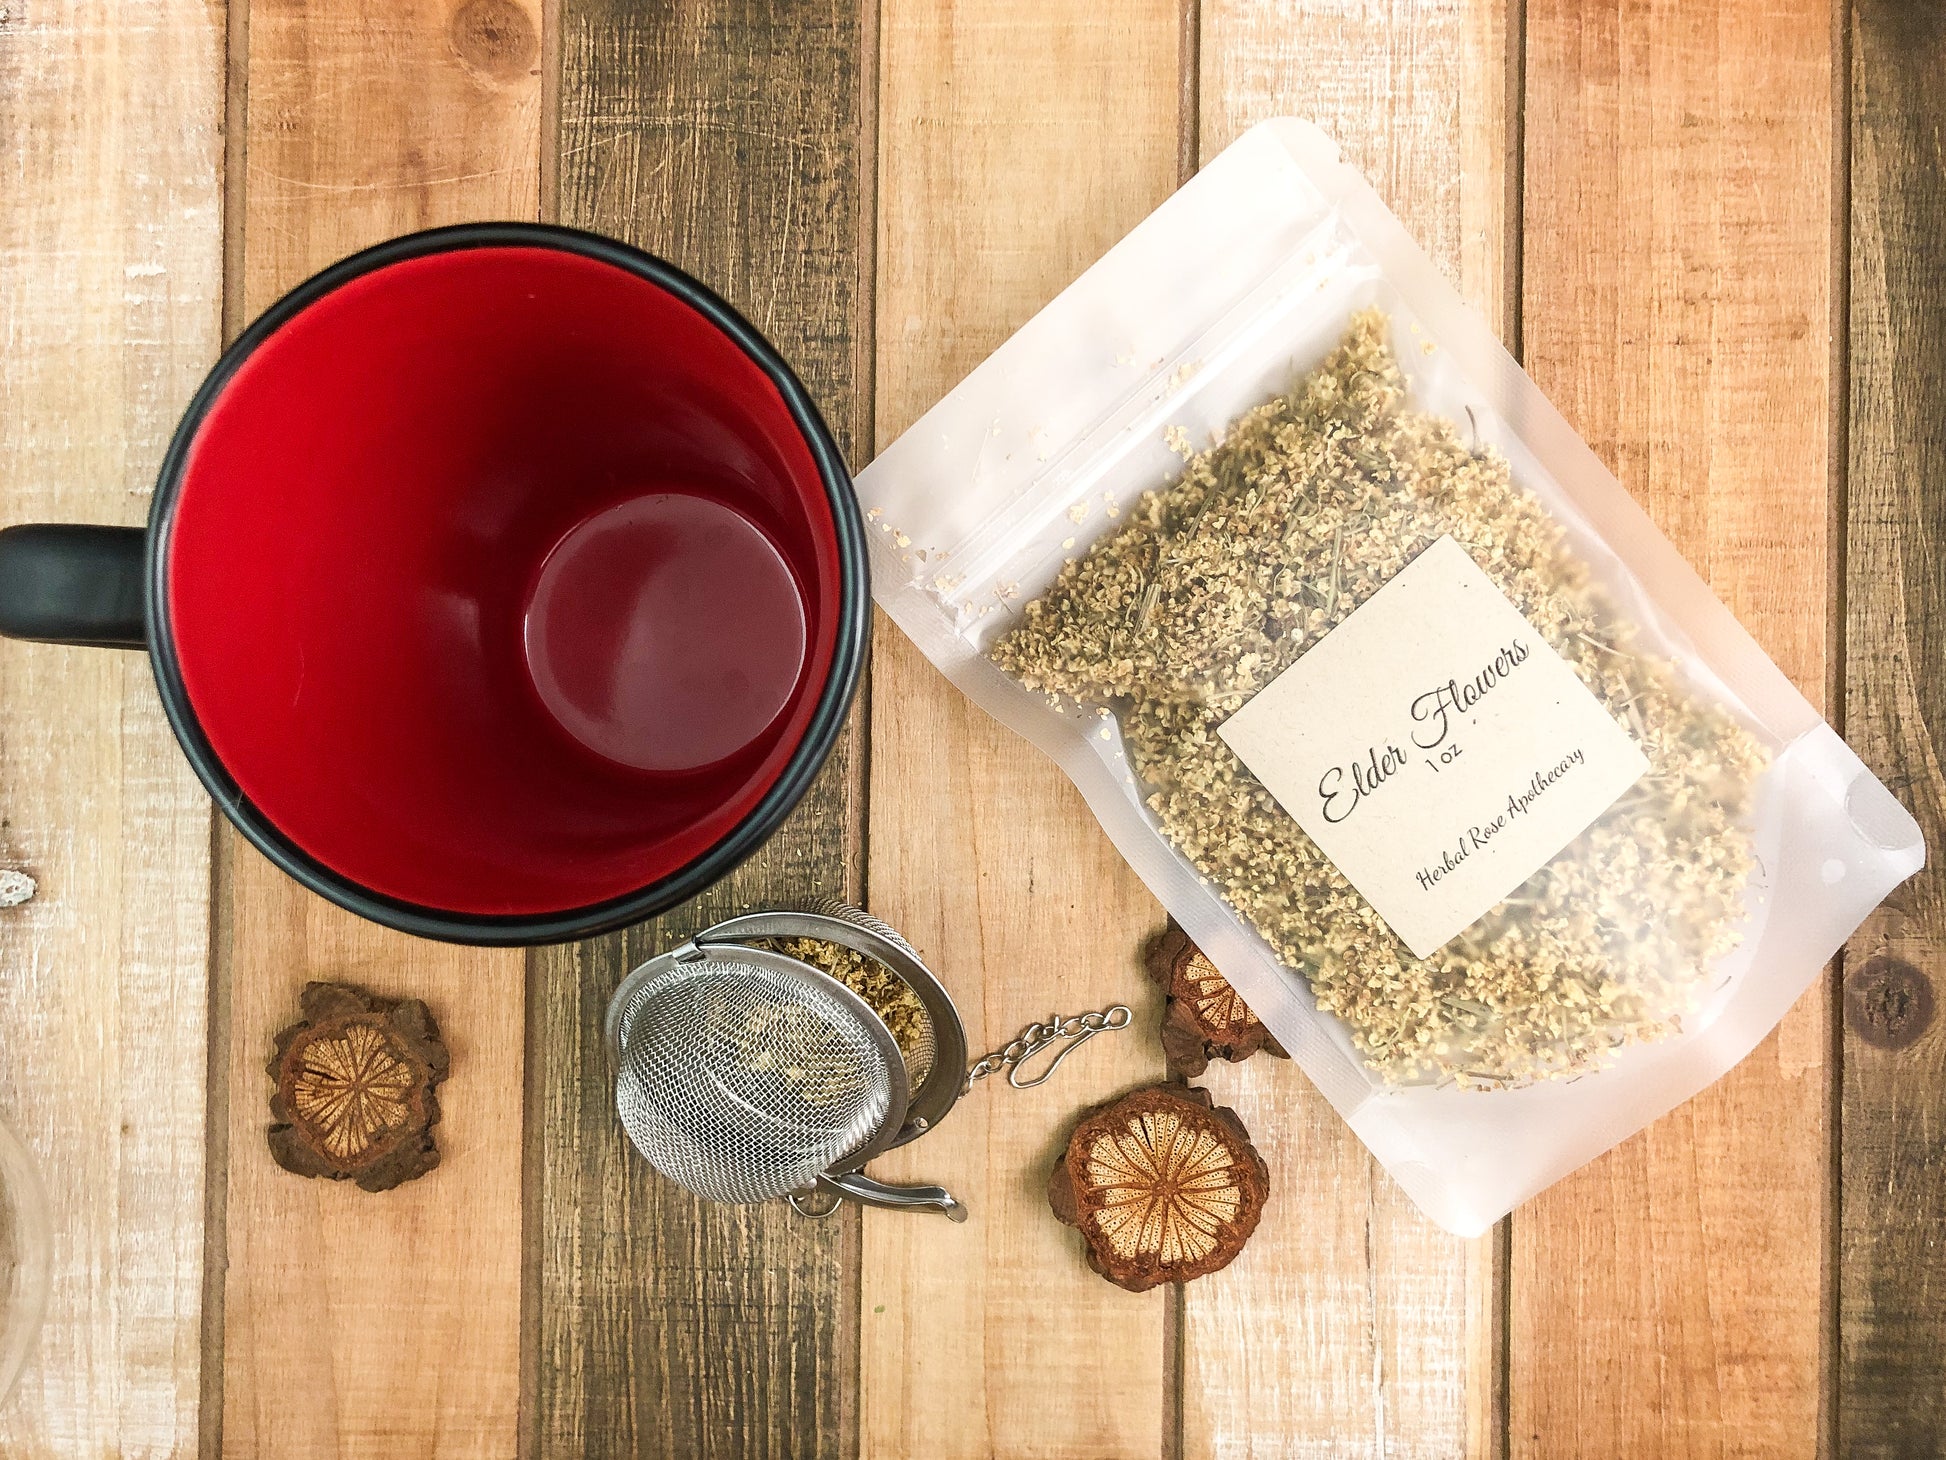 Ariel view of dried elderflowers in a clear bag laying flat next to a black mug  with red inside and mesh tea strainer, with wooden chips scattered around all on a wooden background